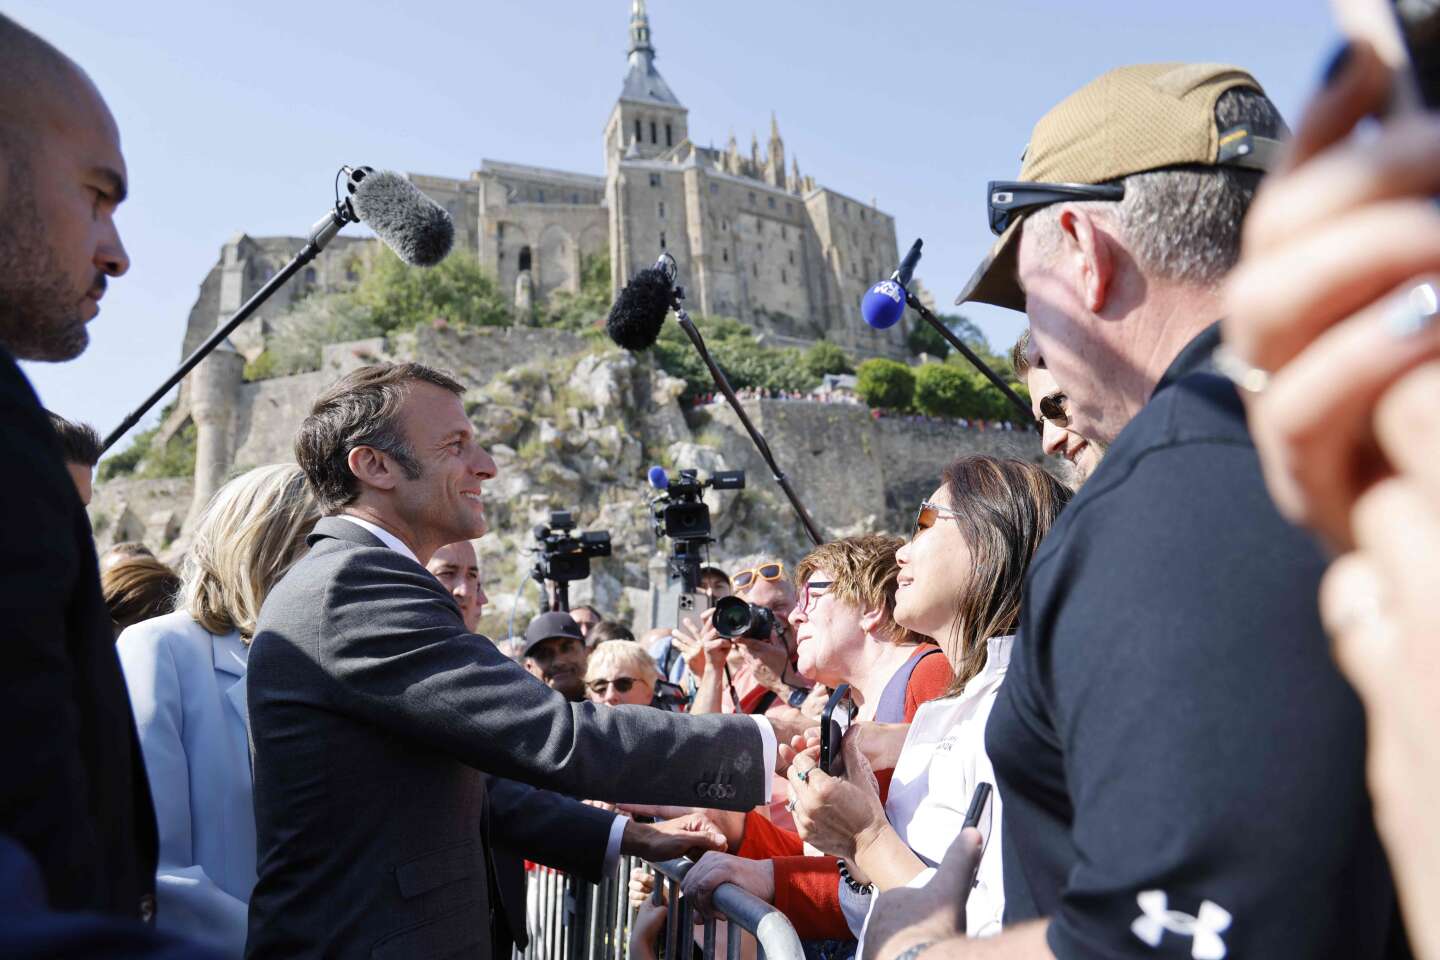 At Mont-Saint-Michel, Emmanuel Macron calls for “not to fear the future”